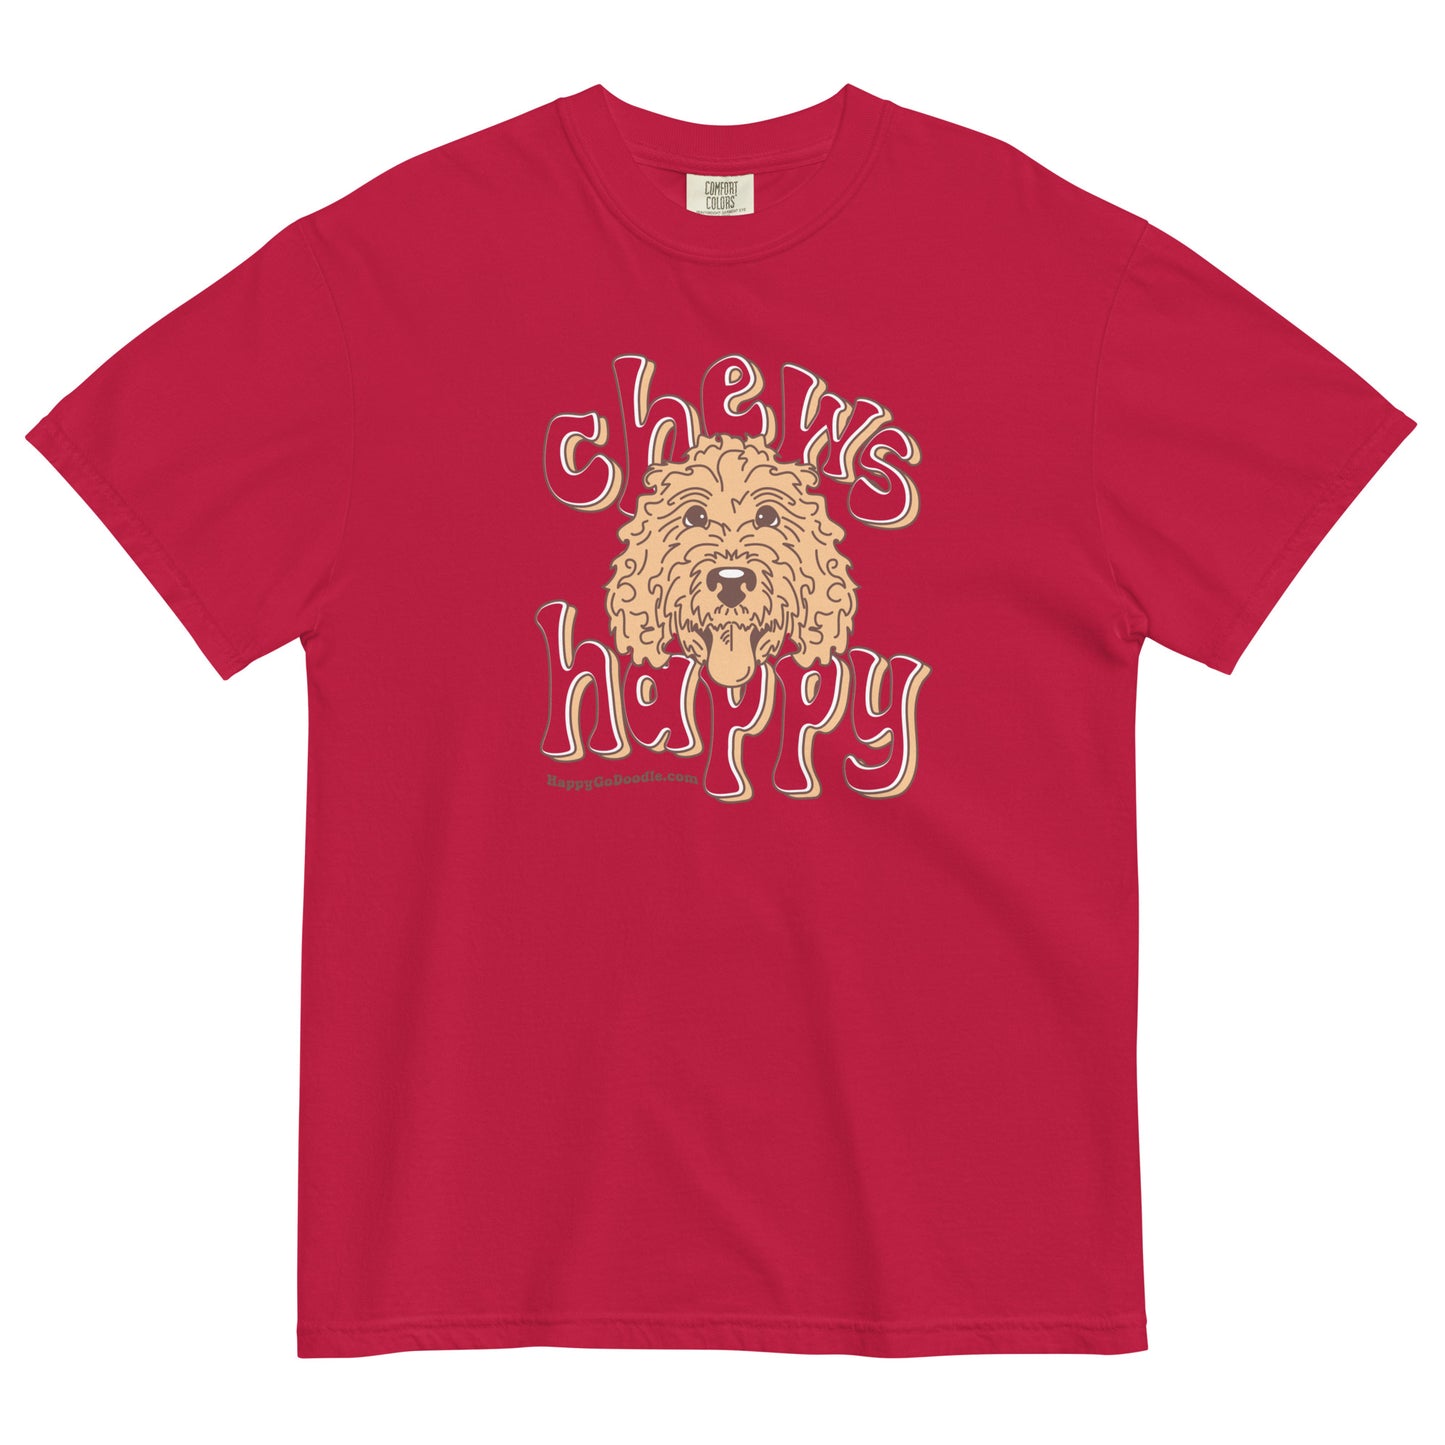 Goldendoodle comfort colors t-shirt with Goldendoodle face and words "Chews Happy" in red color